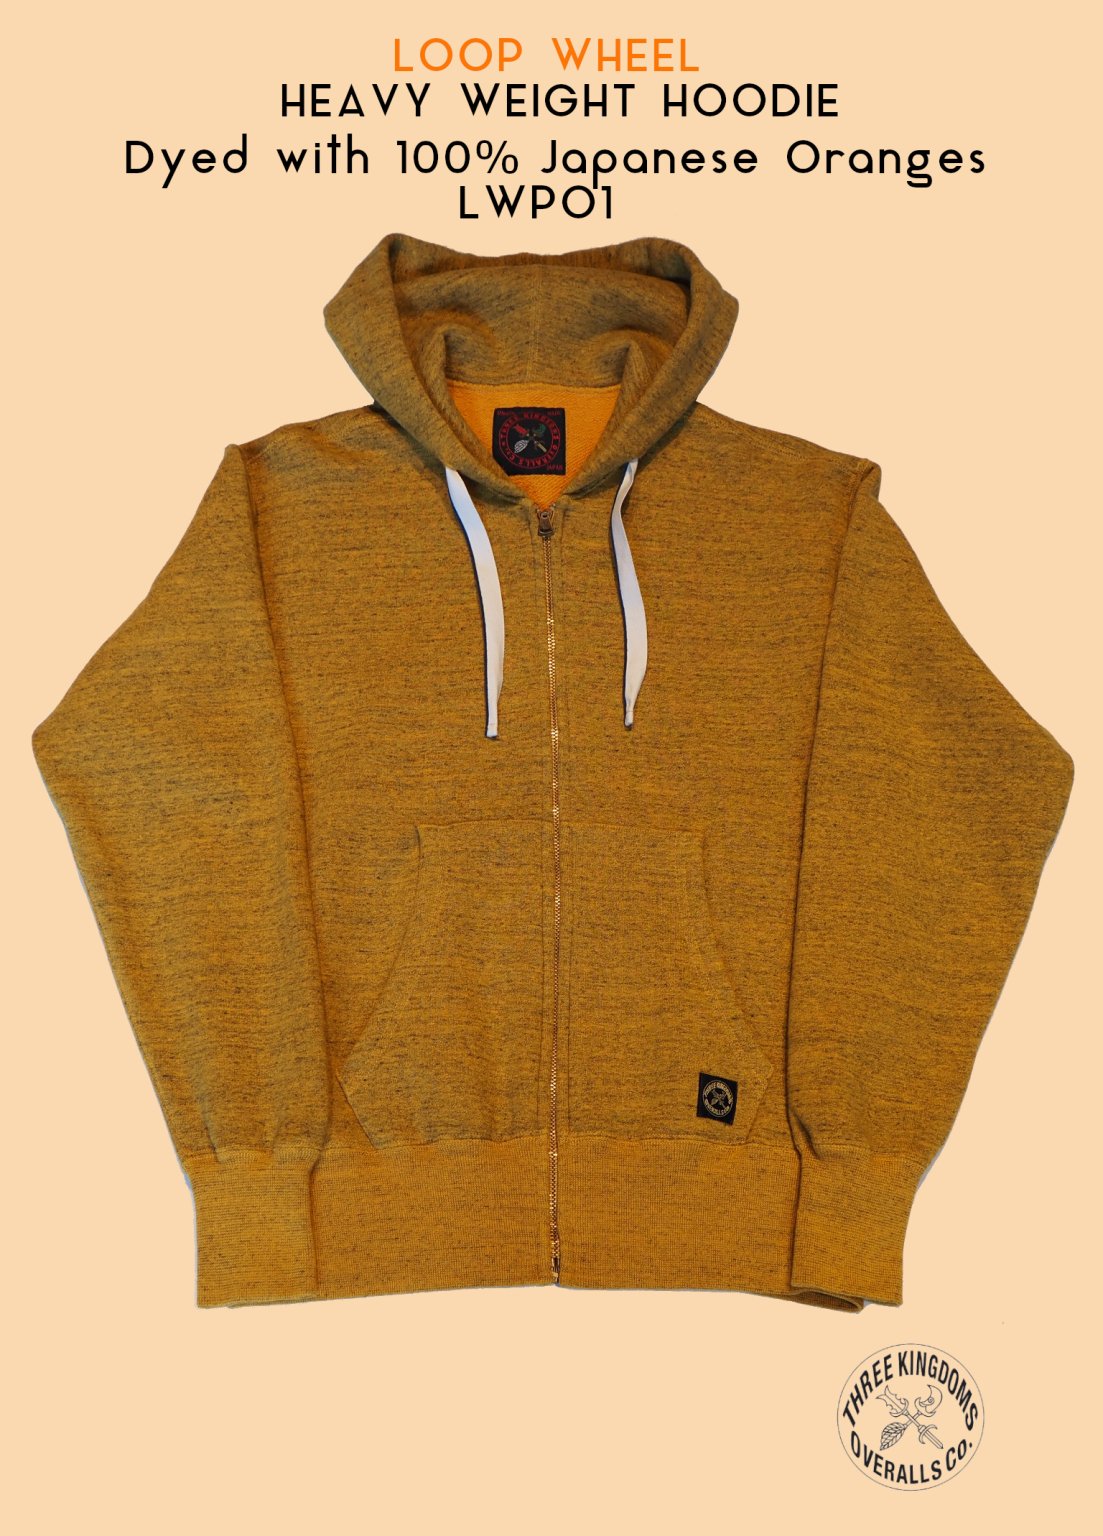 LWPO1 LOOPWHEEL NATURAL DYE HEAVY WEIGHT HOODIE（Japanese Orange）<img class='new_mark_img2' src='https://img.shop-pro.jp/img/new/icons14.gif' style='border:none;display:inline;margin:0px;padding:0px;width:auto;' />